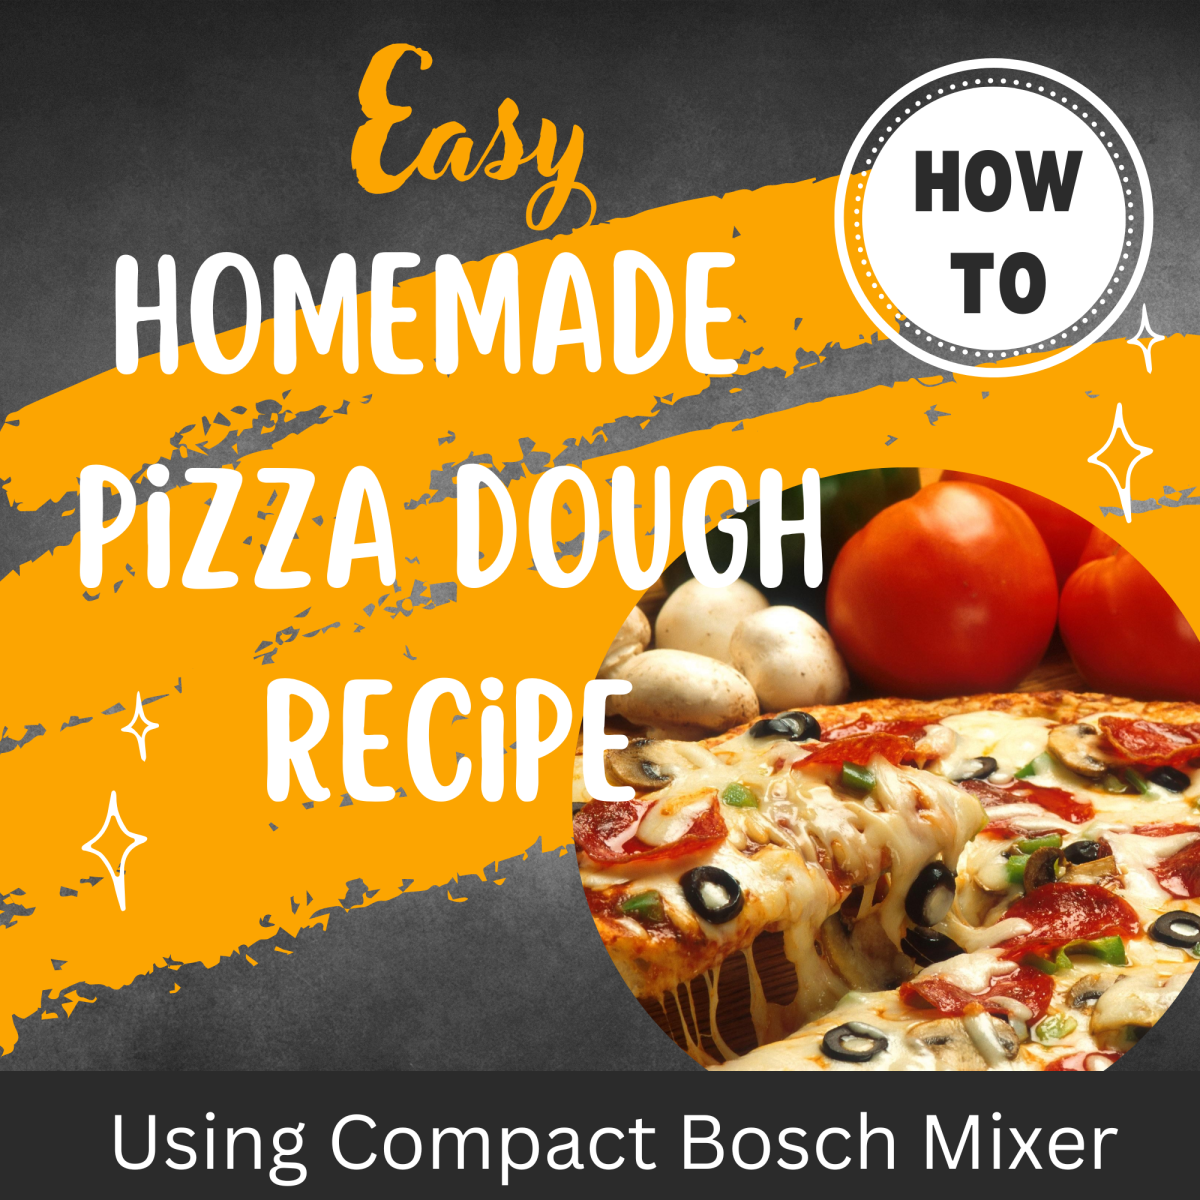 How To Use The Best Bread Dough Mix - Bosch Mixers USA